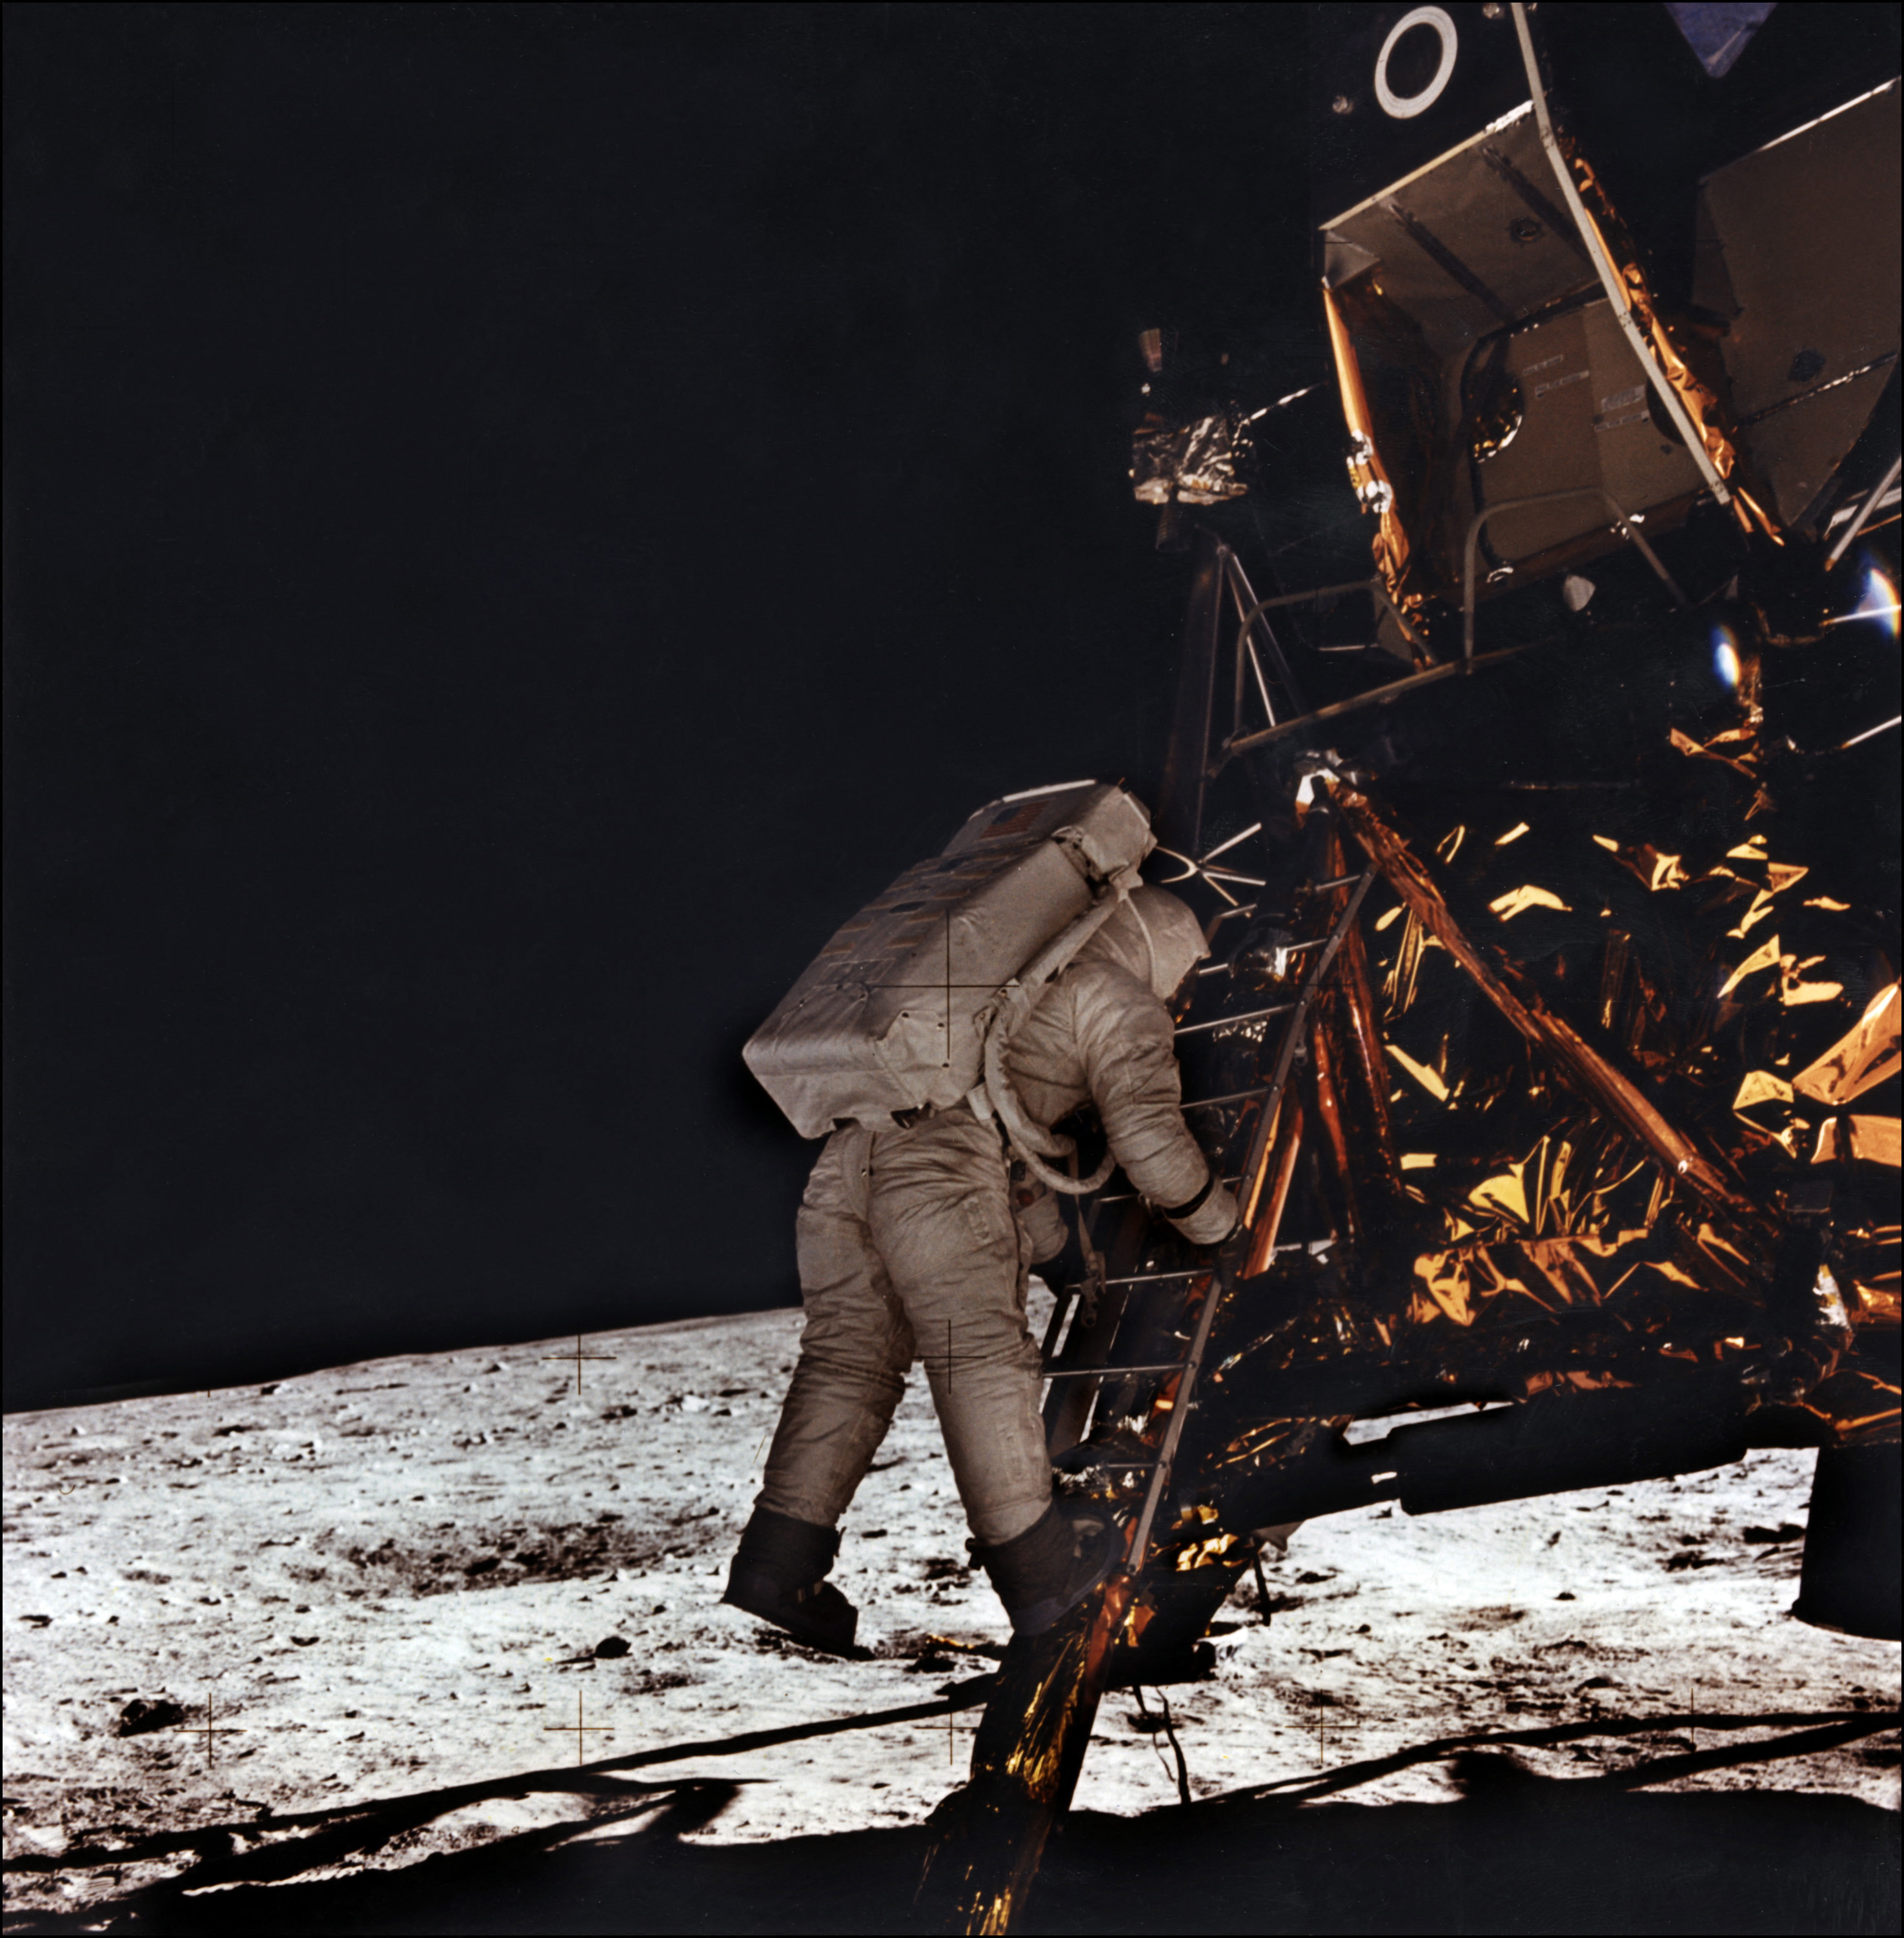 (FILES) This file photo taken on July 21, 1969 shows the astronaut Edwin E. Aldrin descending the steps of the Apollo XI Lunar Module (LM) to walk on the moon. (Photo by NASA / AFP)